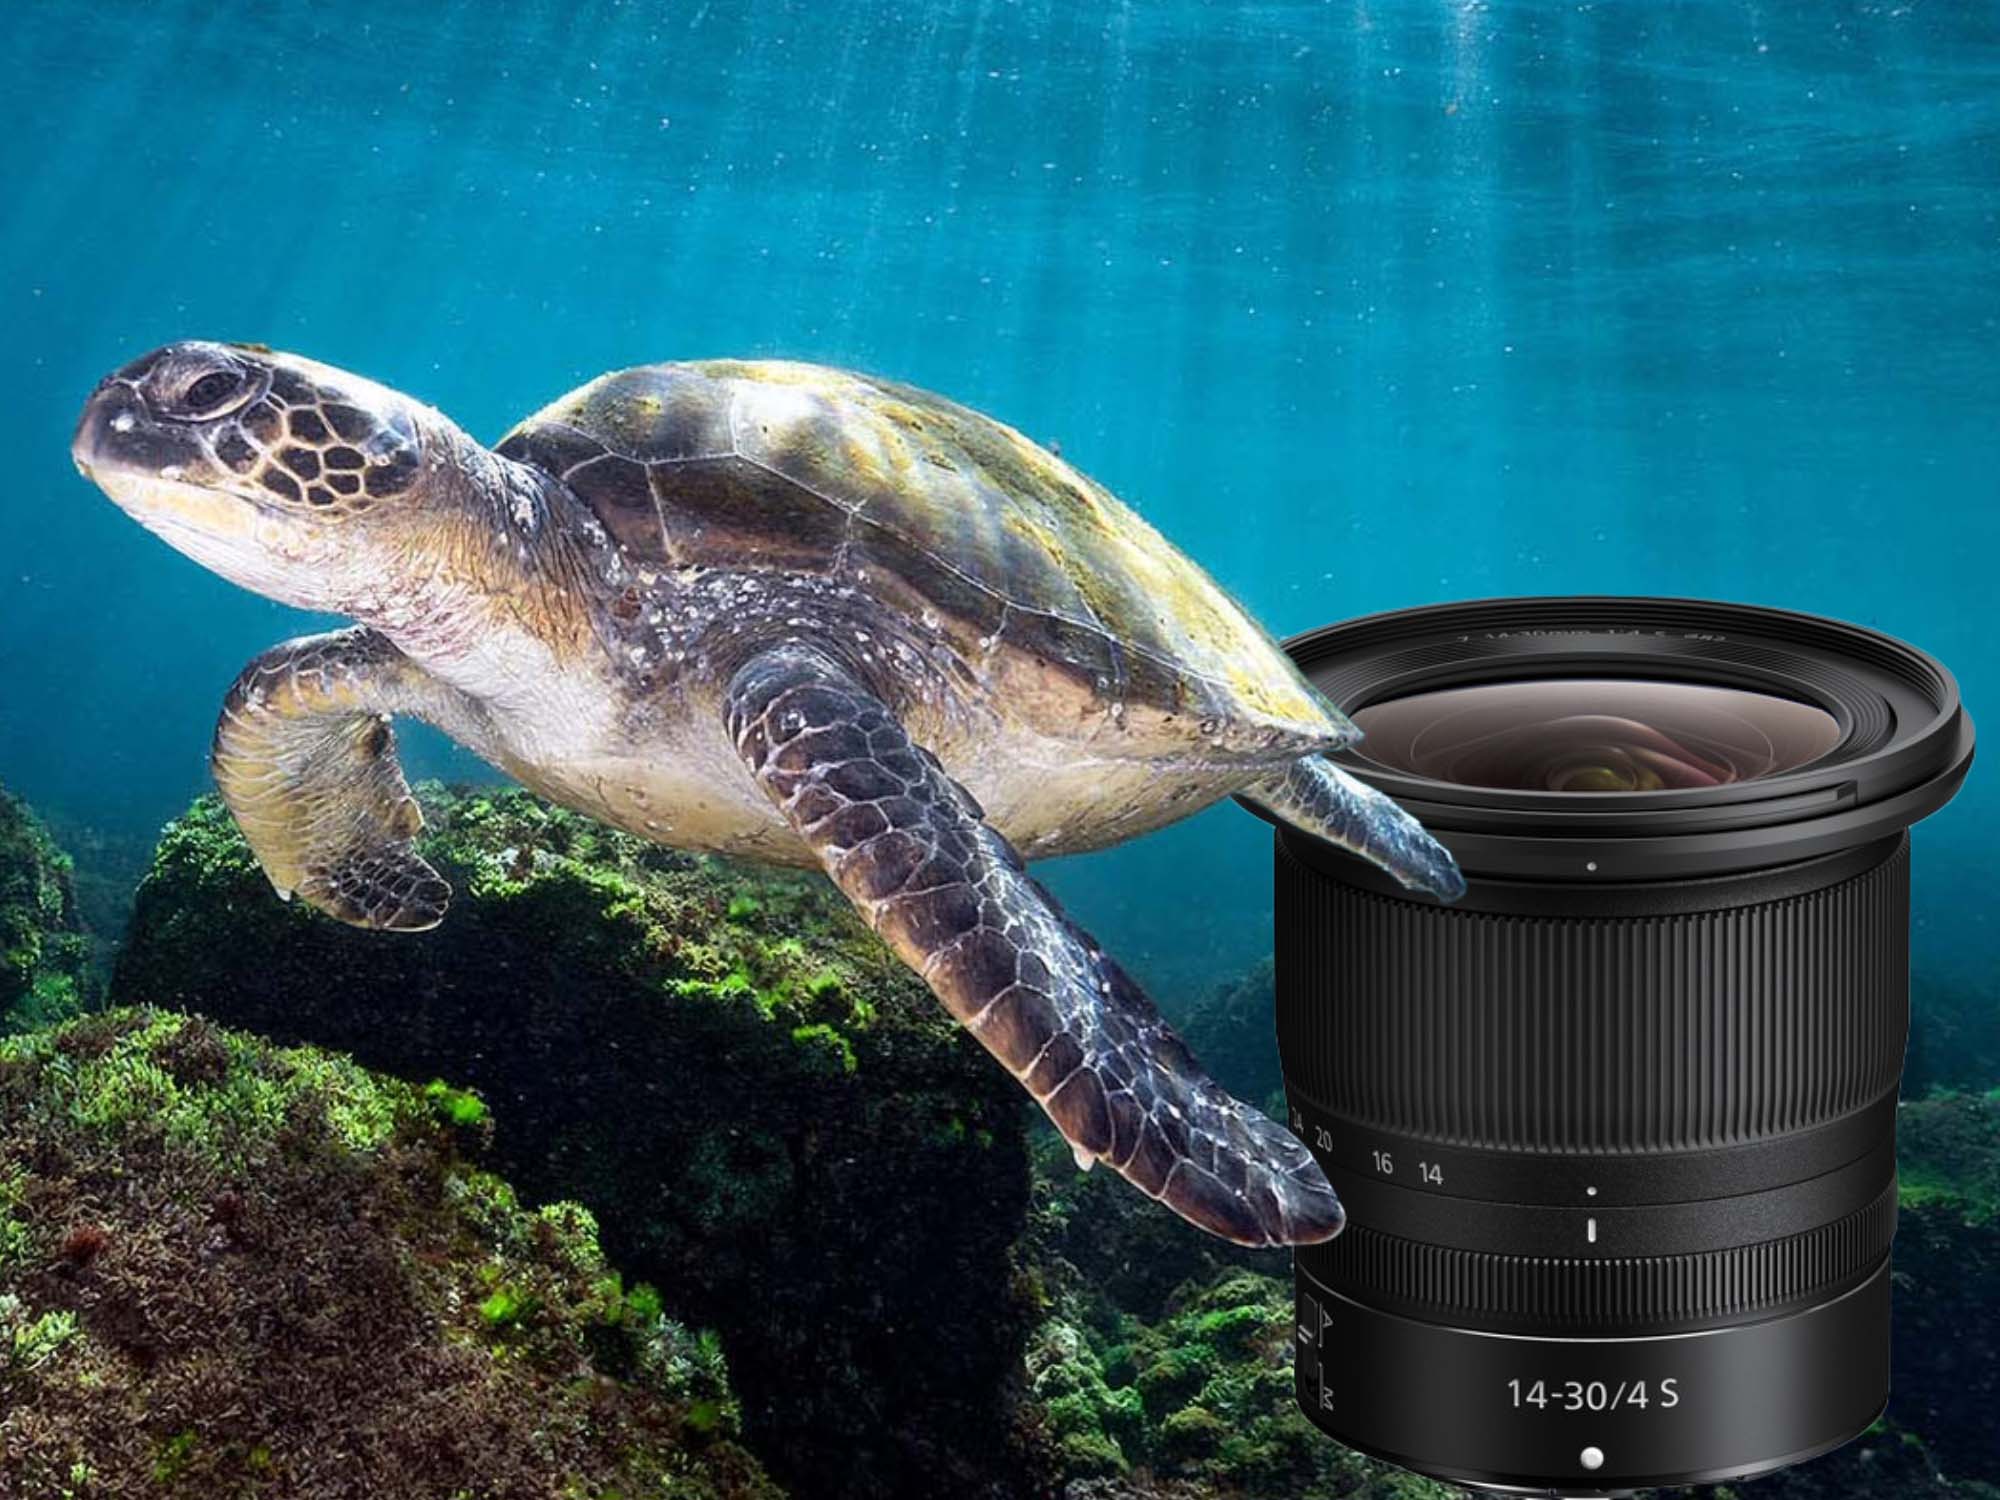 Nikon Z 14-30mm f/4 S Lens for Underwater Photography Review & Results